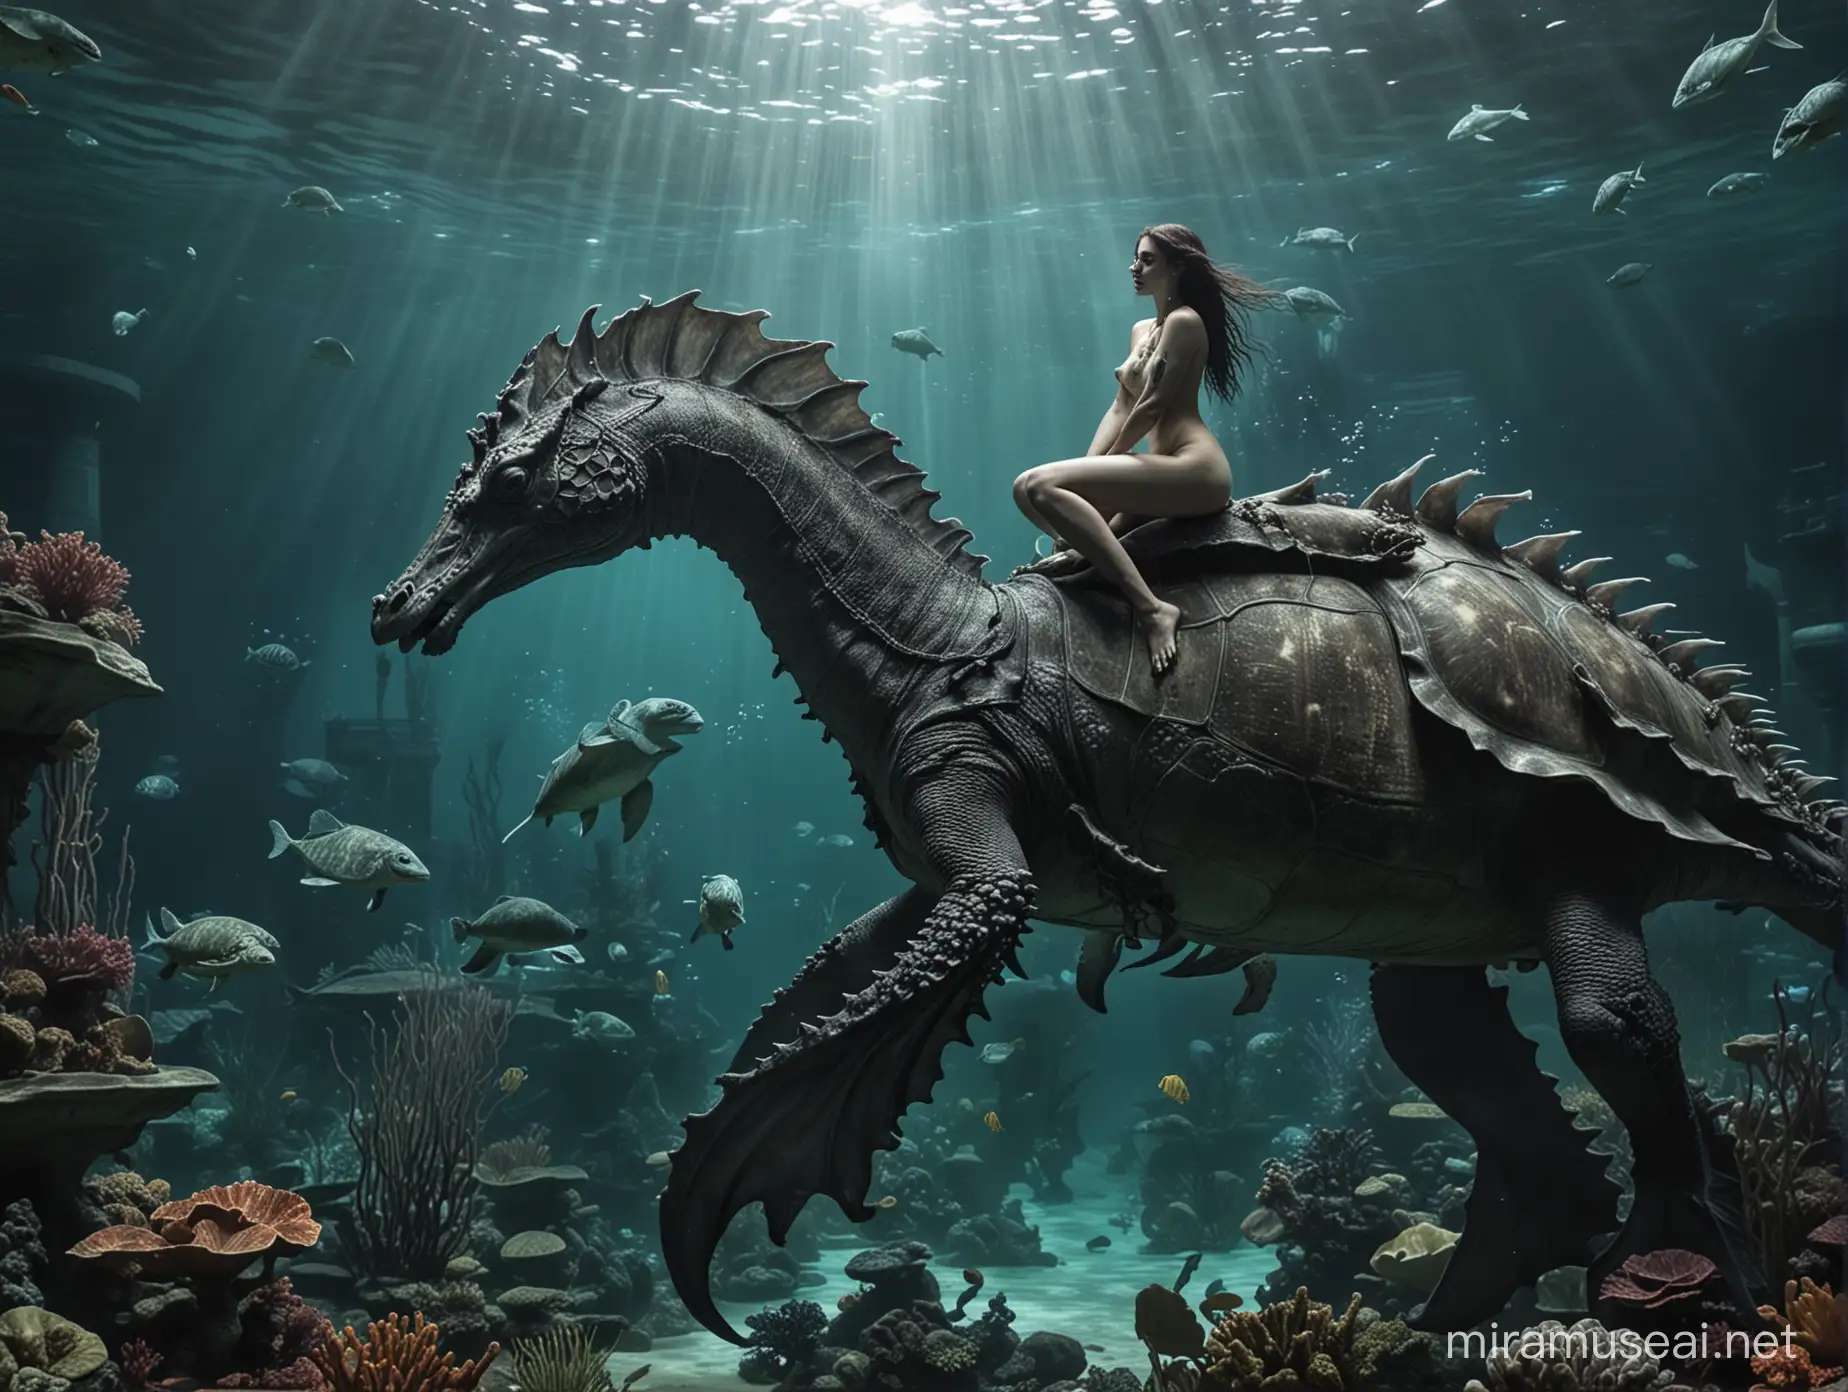 Naked Gothic Female riding a huge seahorse in a huge fish tank with sea turtles